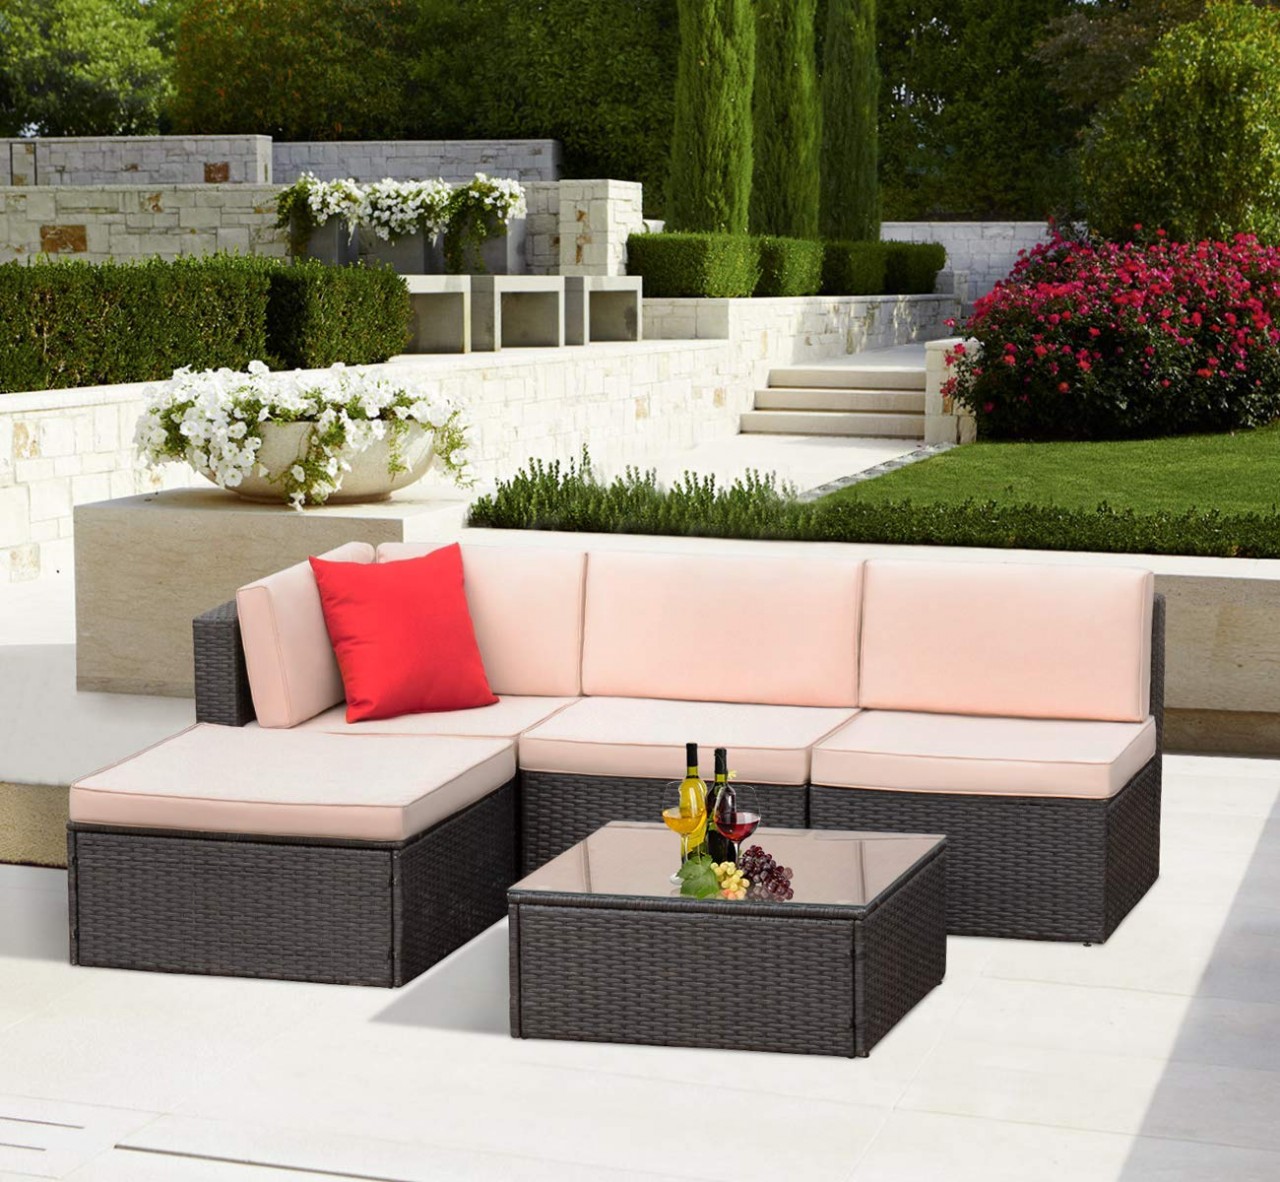 Outdoor Patio Furniture Lawn Garden Patio Sets All-Weather Wicker PE Ratten Sectional Sofa Sectional